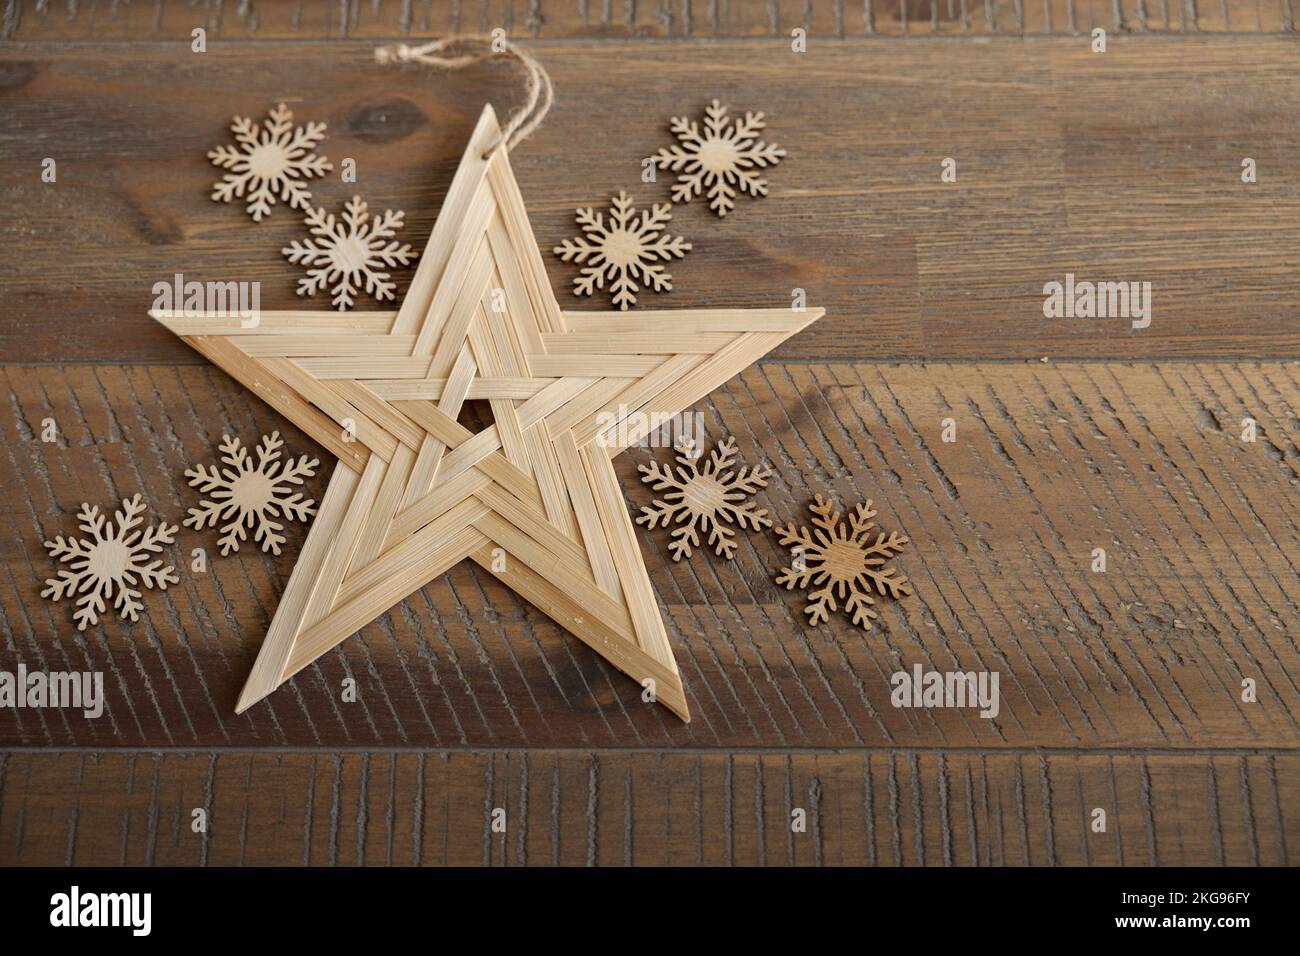 New Year's natural decorations made of wood lies on a beautiful wooden table, space for text Stock Photo